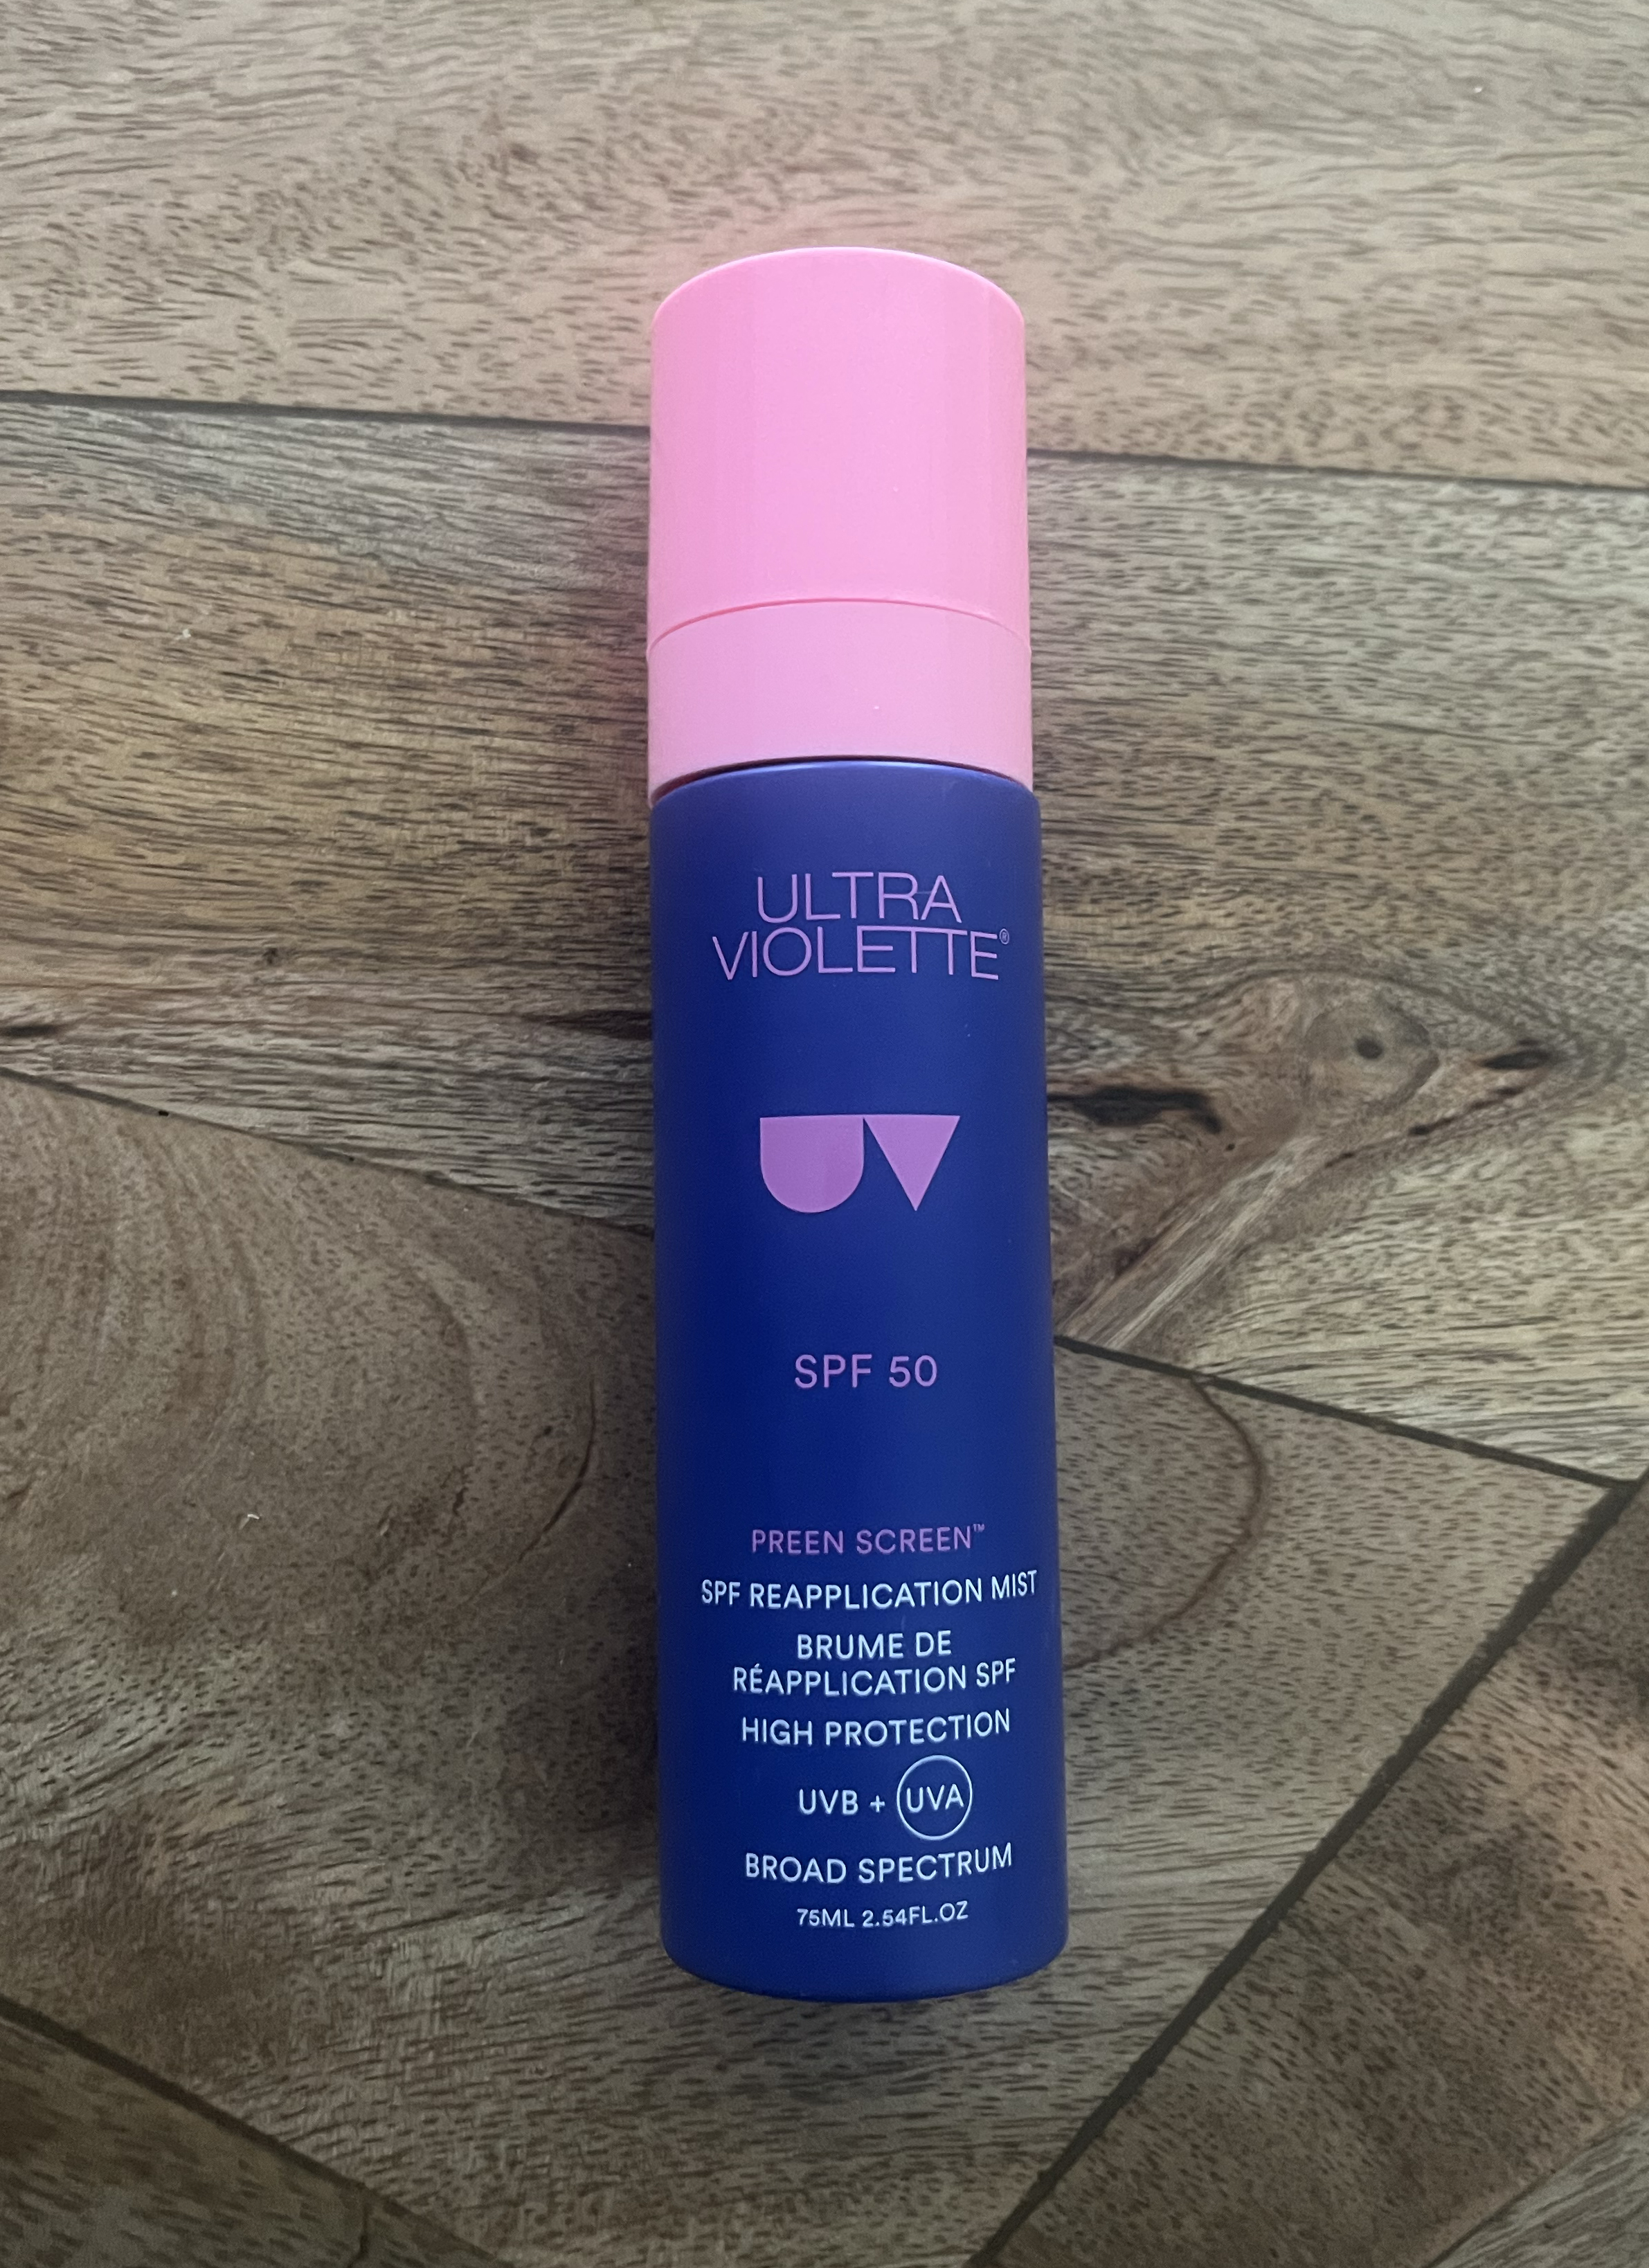 Ultra Violette is perfect for reapplication on hot days.